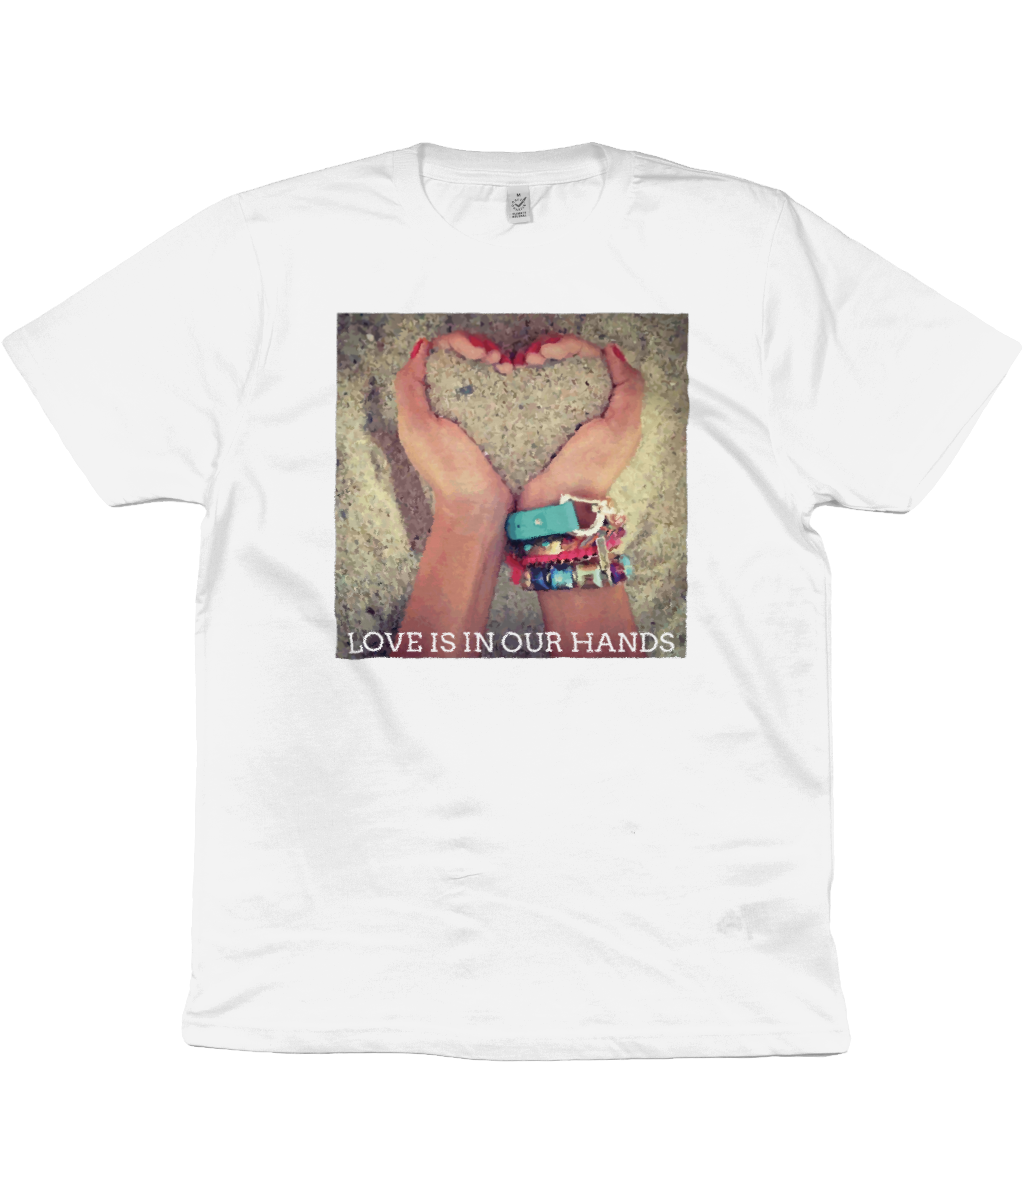 Unisex 'Love is in Our Hands' Tee (White)